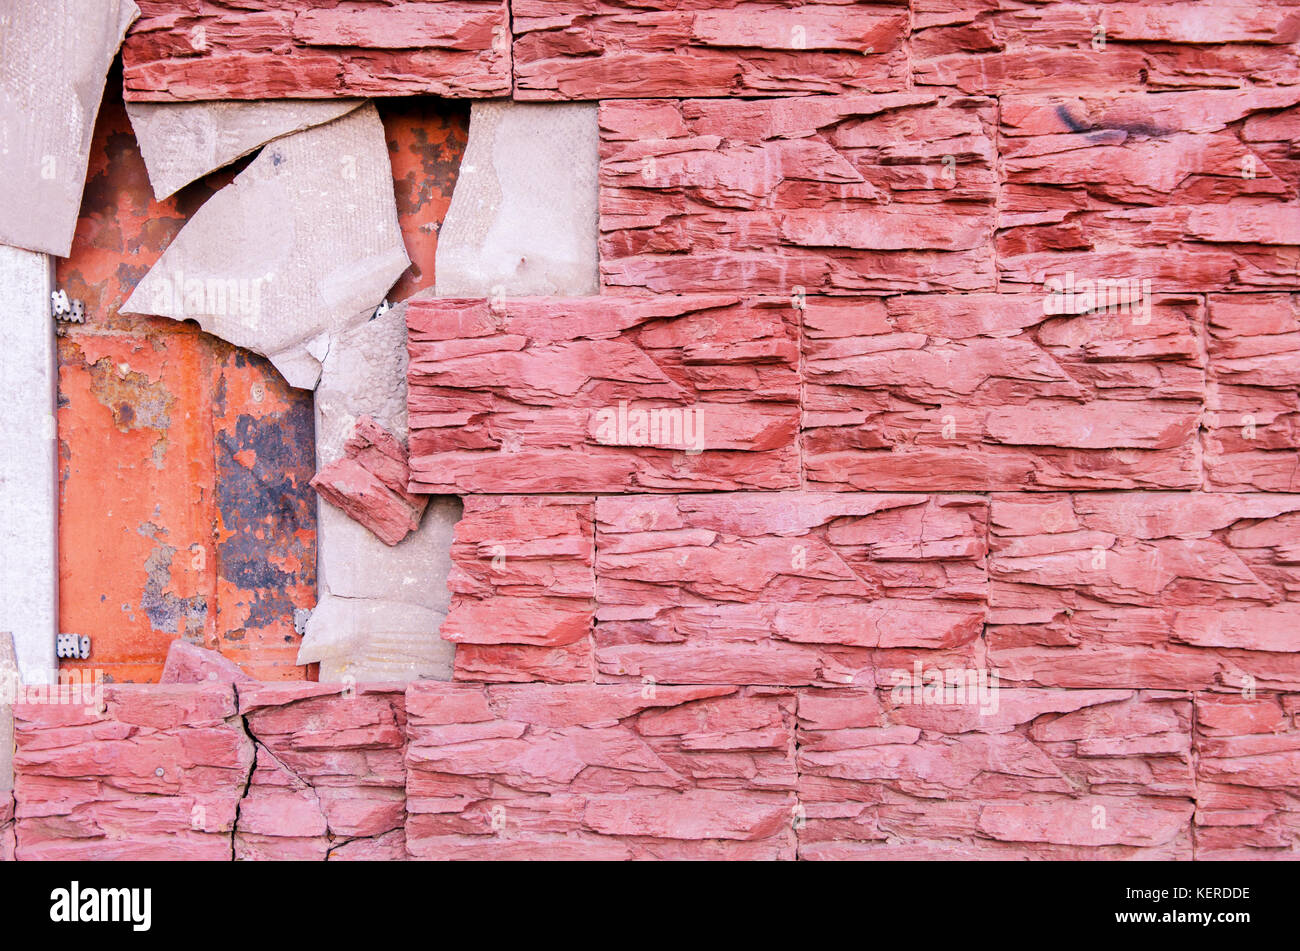 The broken tile on the tiled wall of the building requires repair. toned. Stock Photo